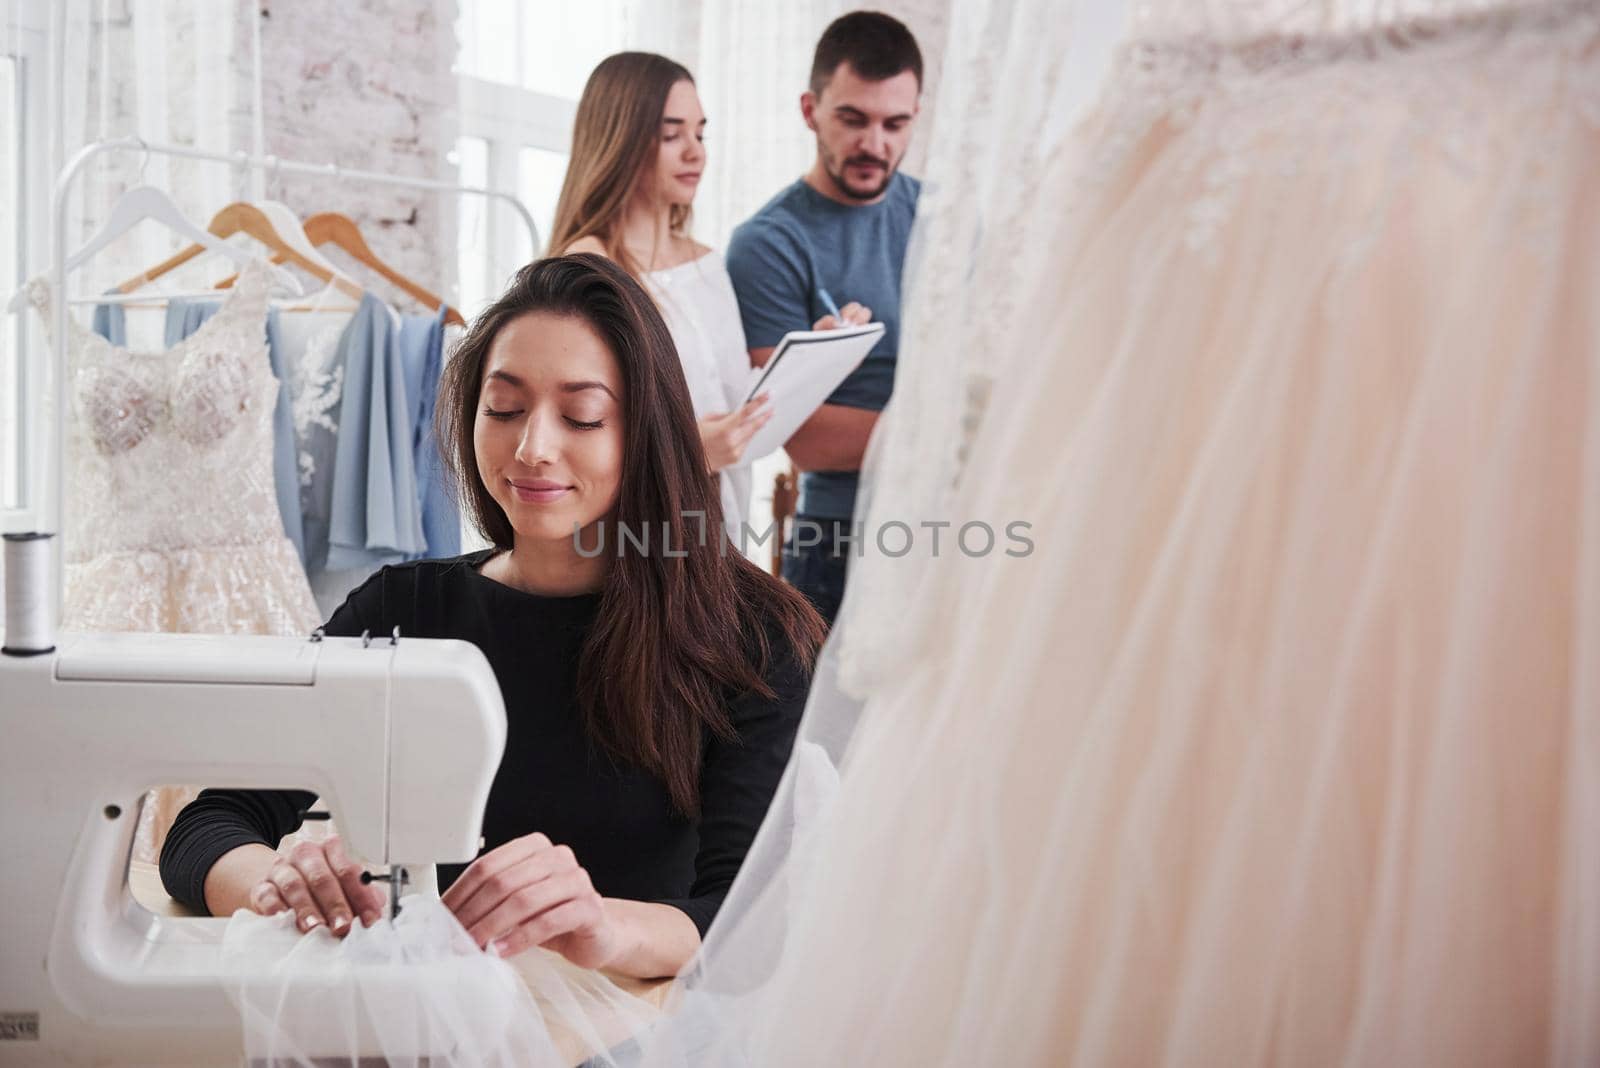 Employees makes calculations for an order behind. Female fashion designer works on the new clothes in the workshop by Standret